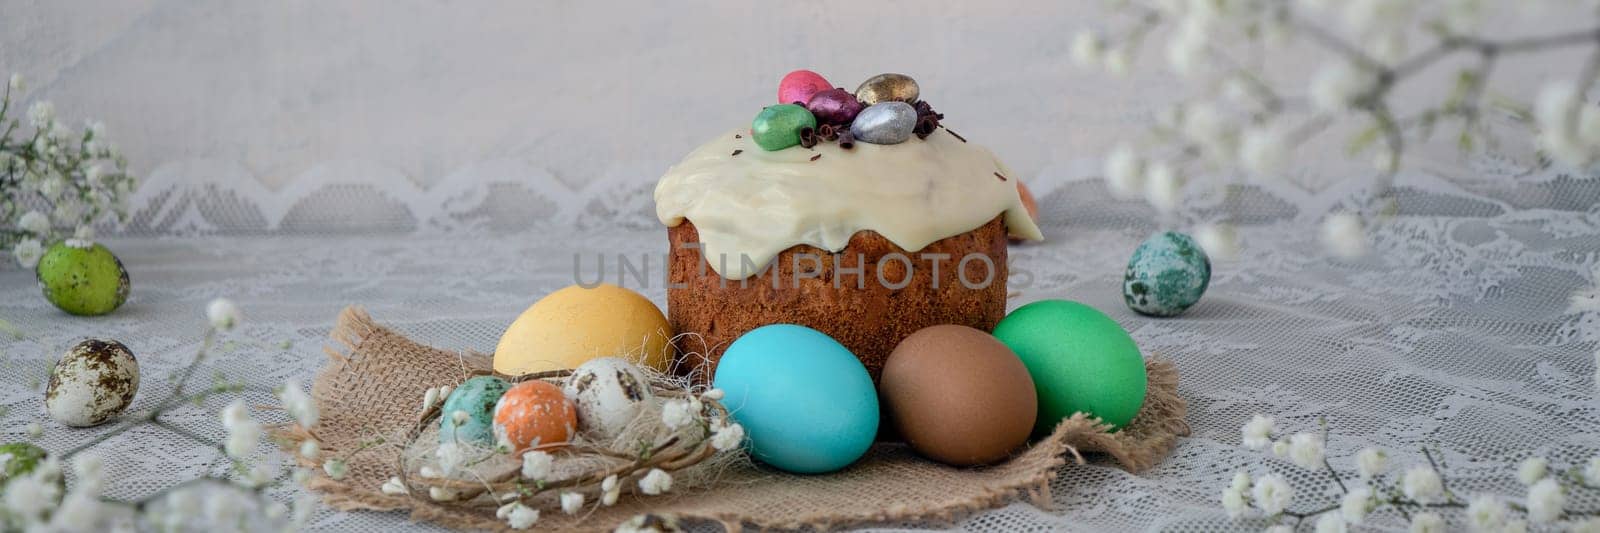 banner of Easter cake decorated with chocolate eggs, colored eggs on a lace white tablecloth. Happy Easter concept. white spring flowers. soft focus. copy space,